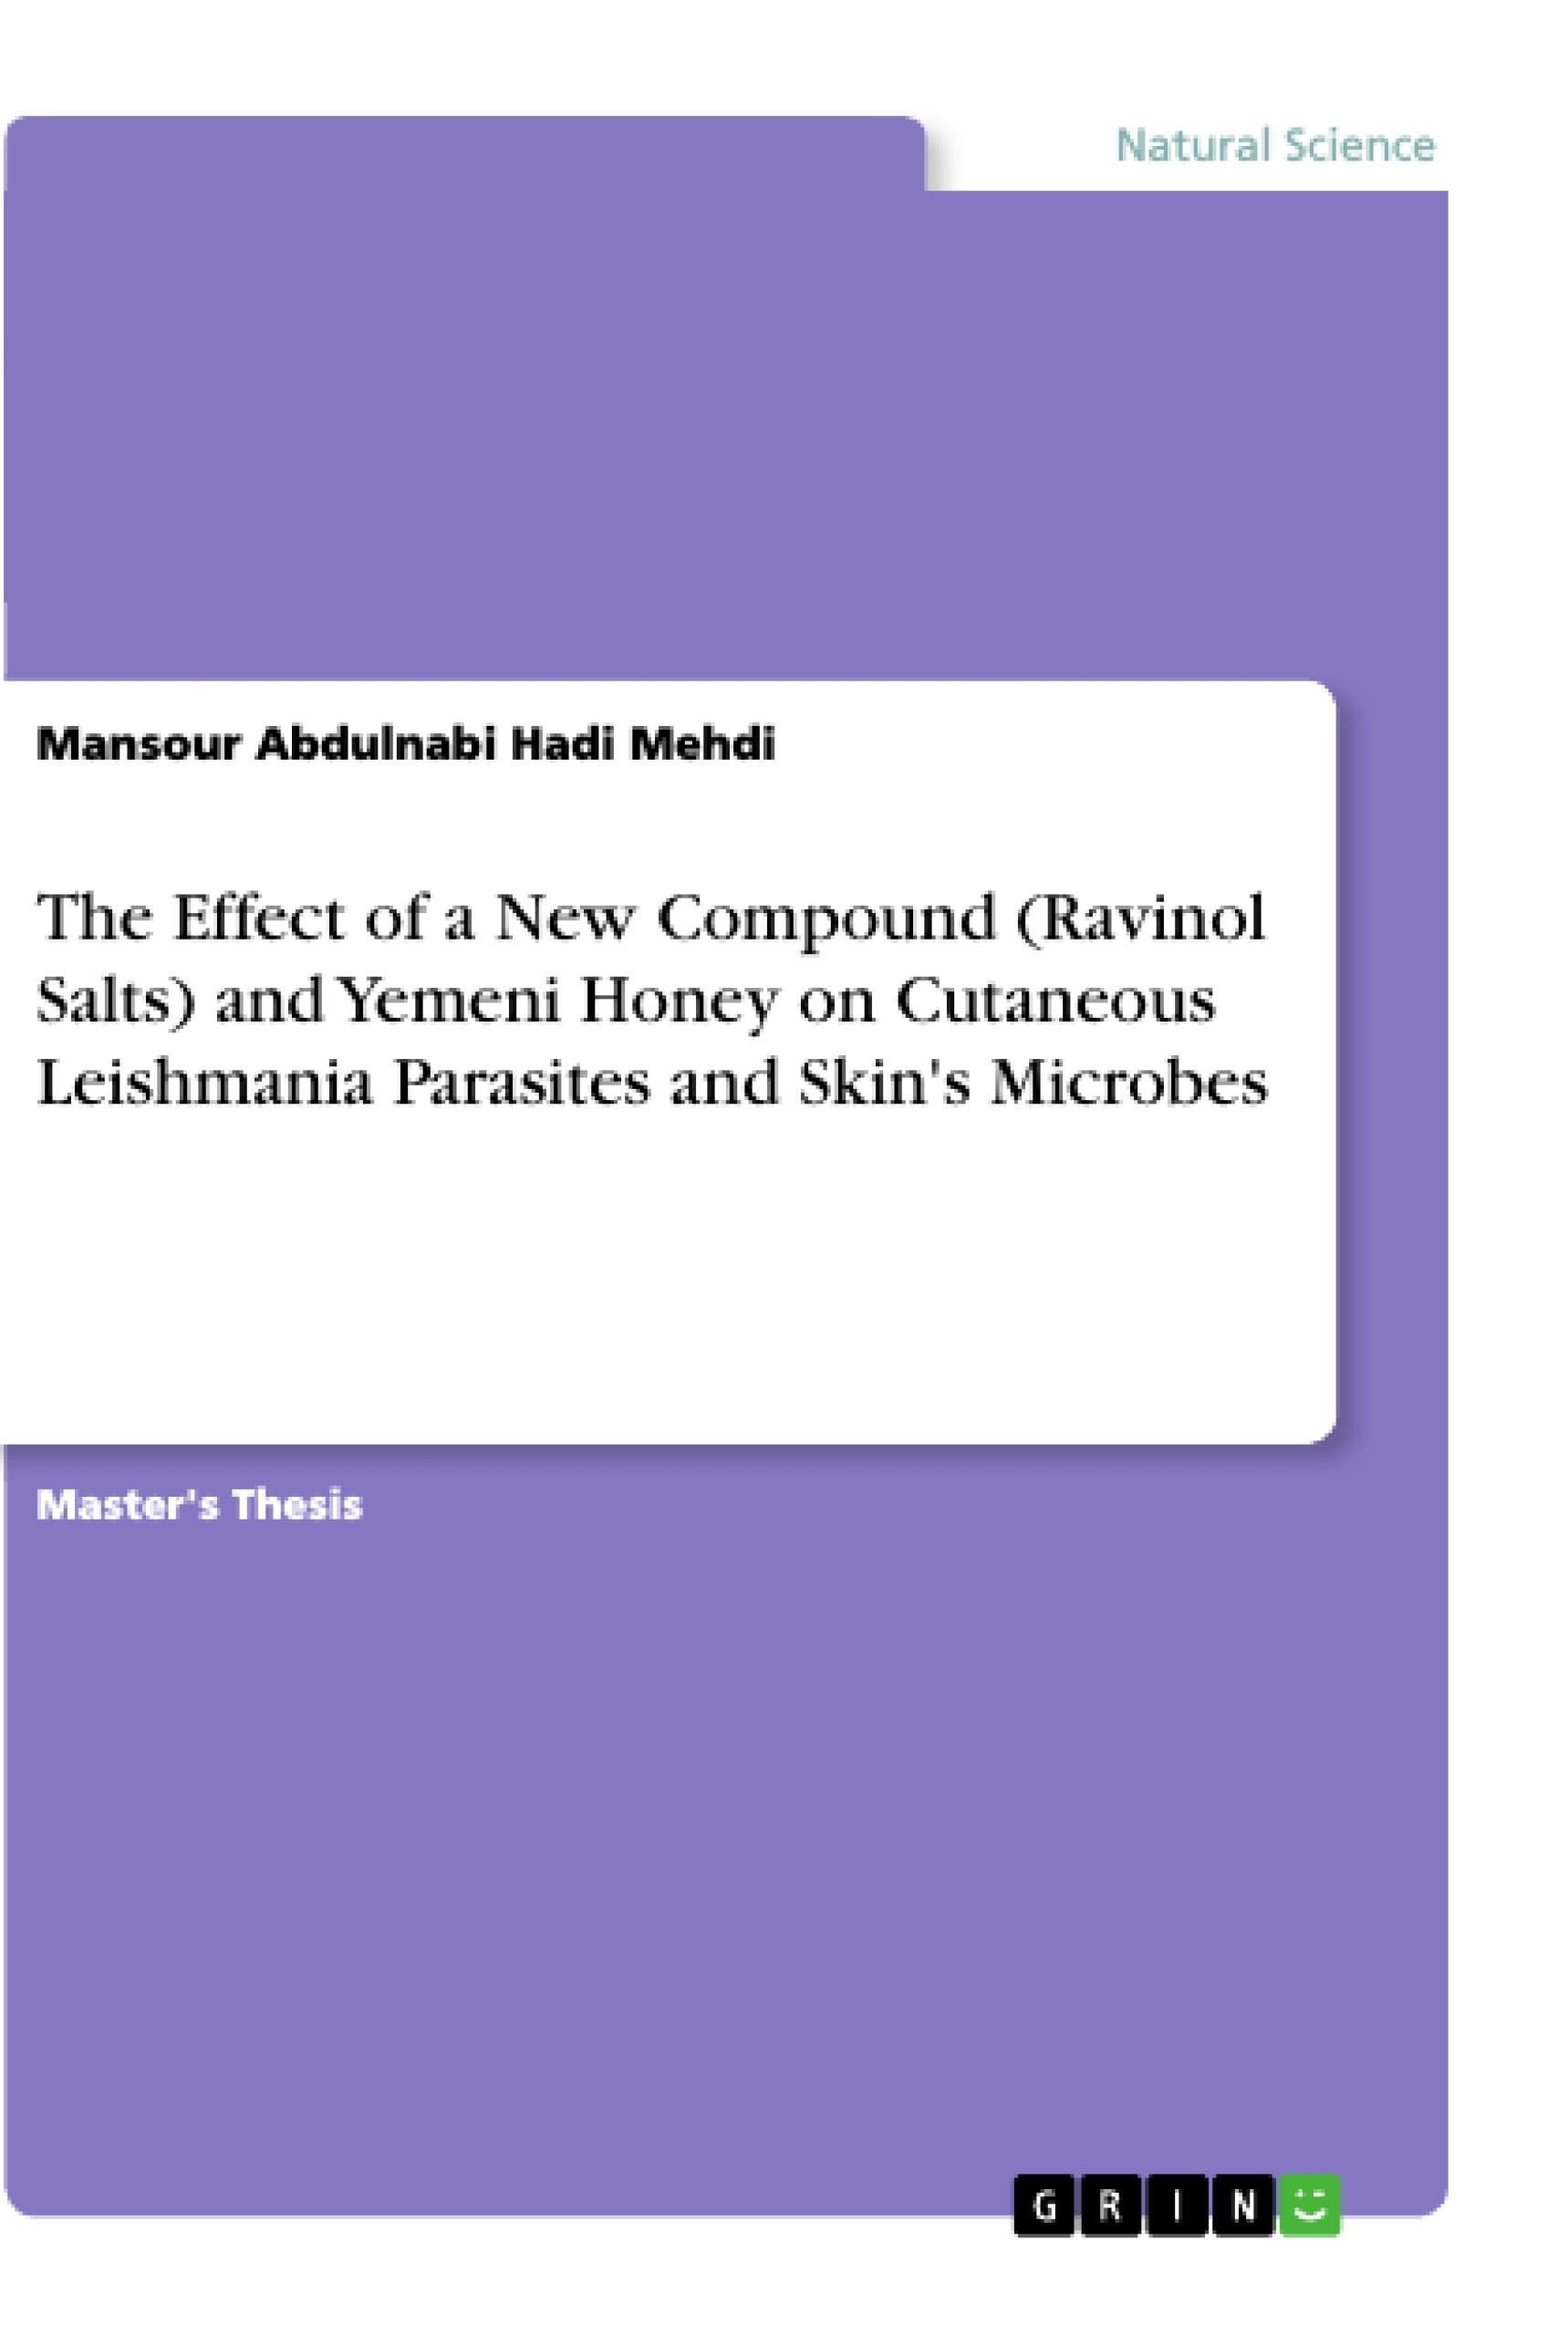 Título: The Effect of a New Compound (Ravinol Salts) and Yemeni Honey on Cutaneous Leishmania Parasites and Skin's Microbes